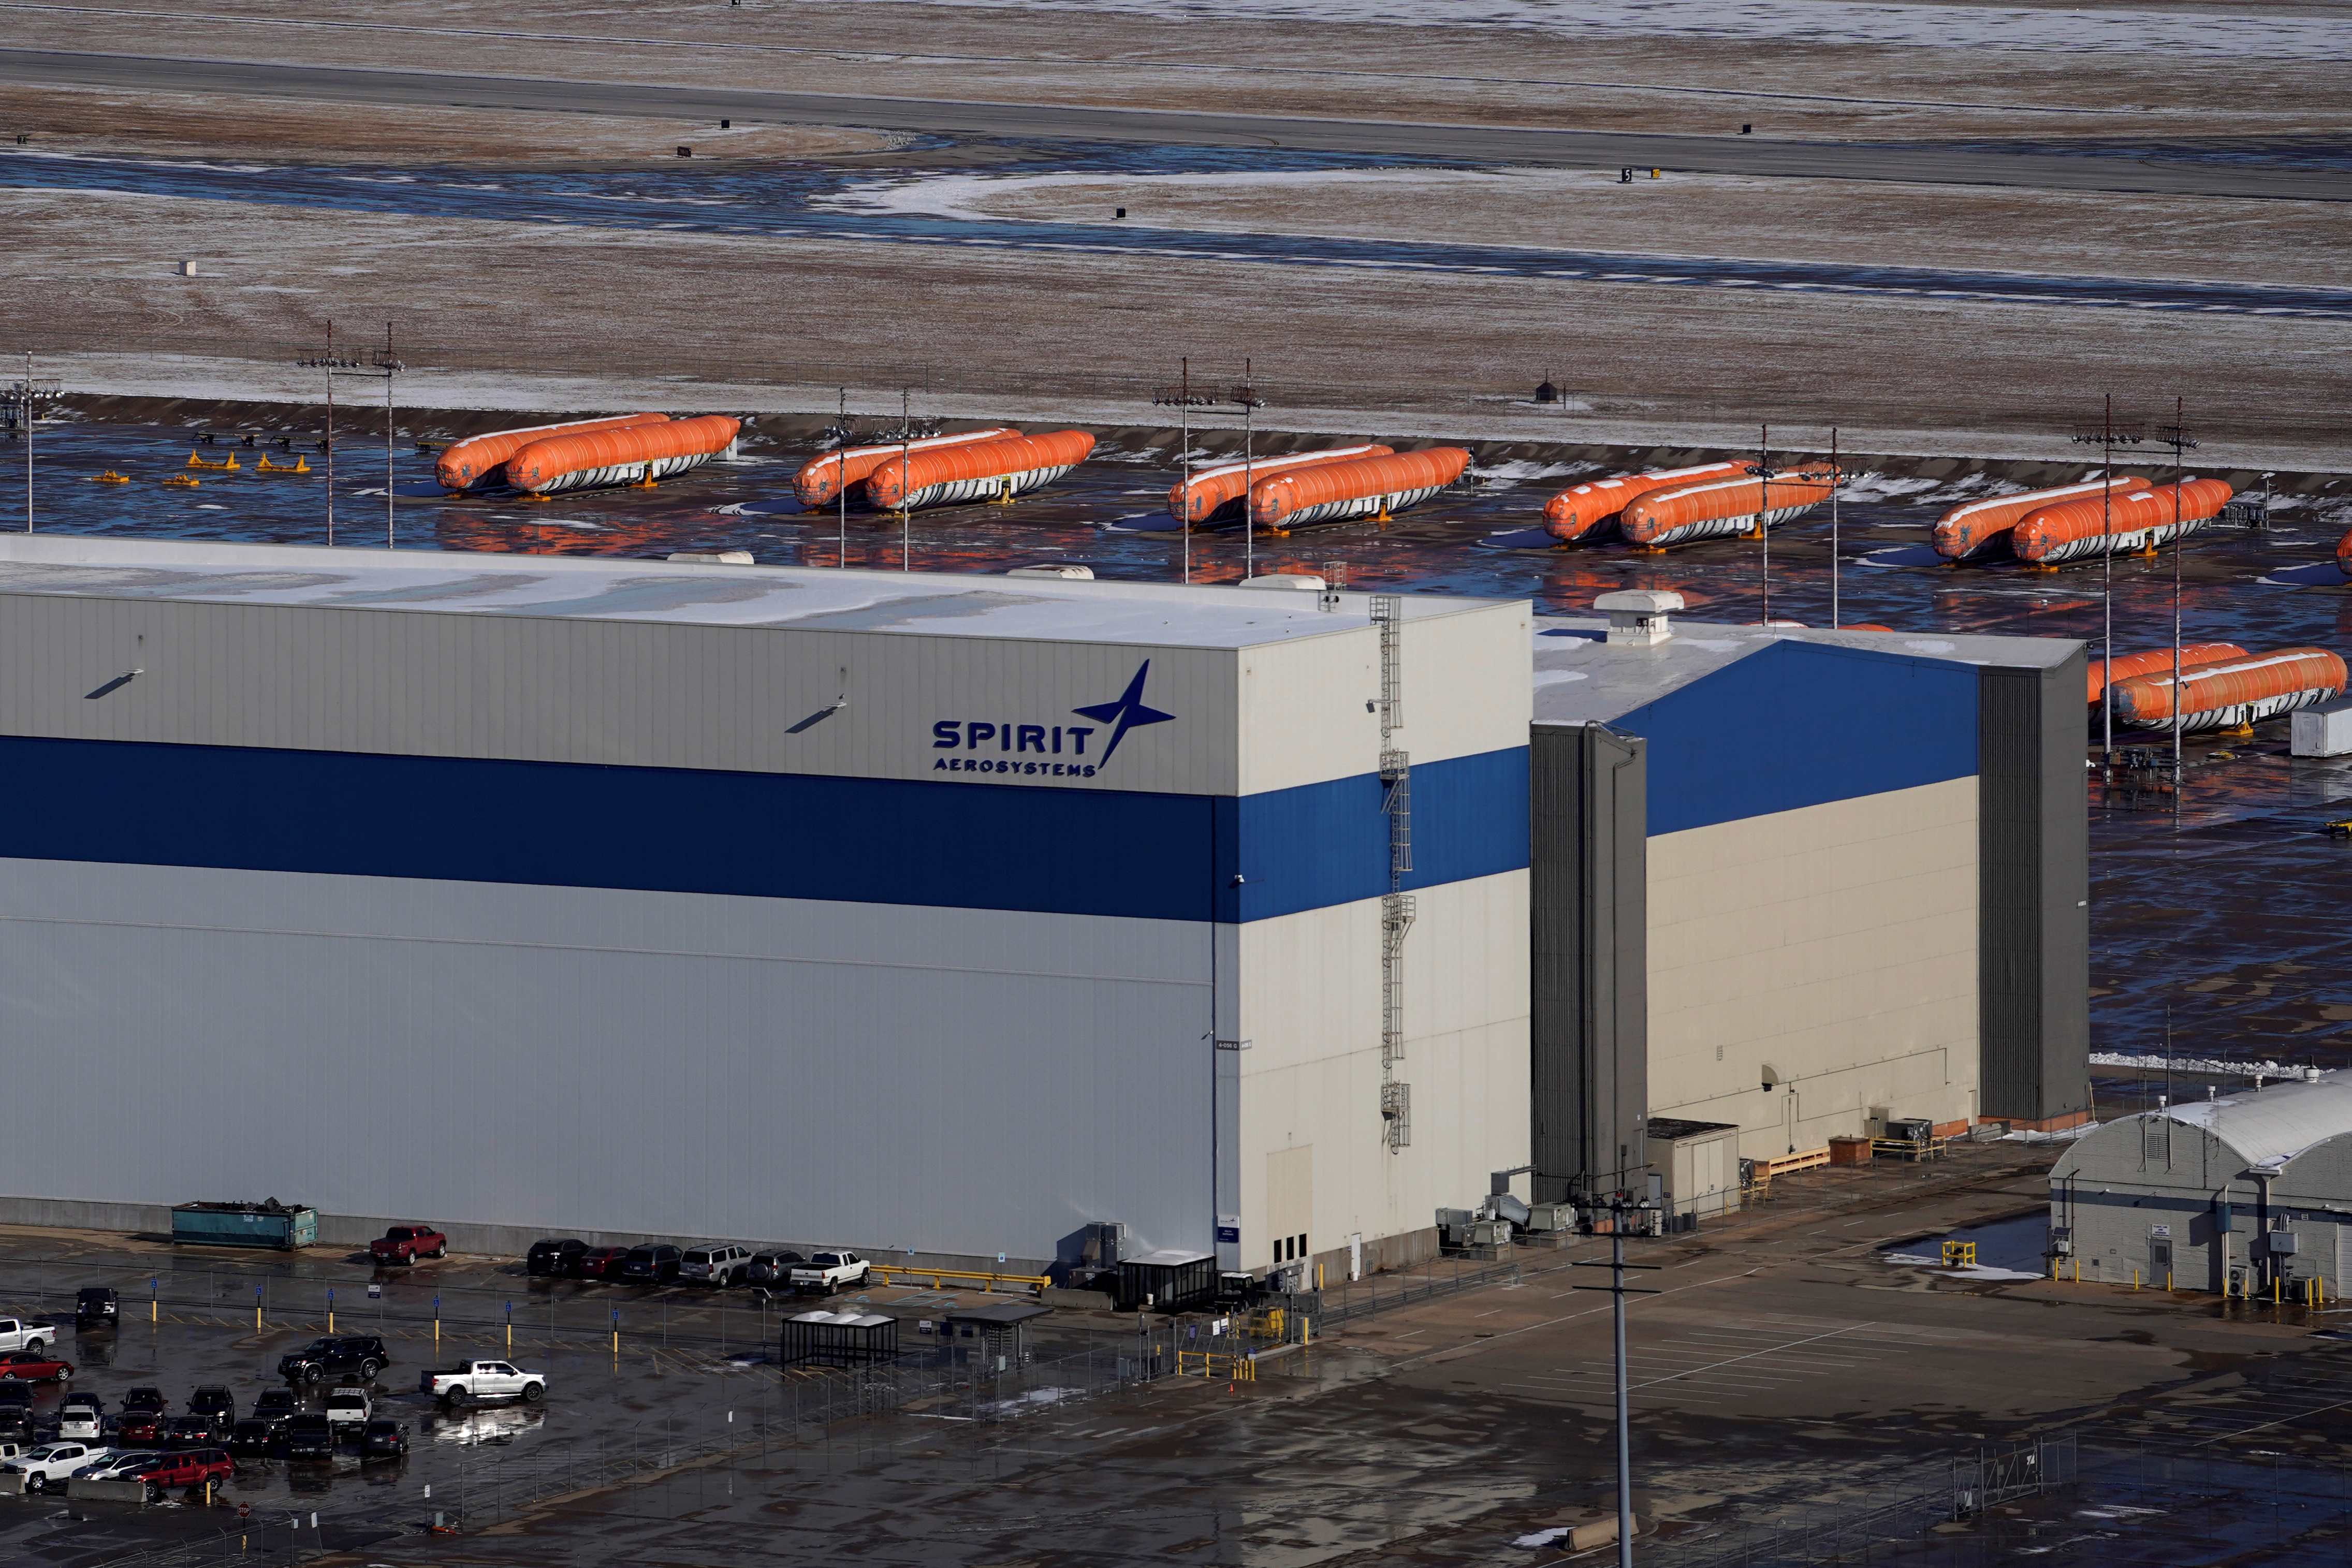 Airplane fuselages bound for Boeing's 737 Max production facility sit in storage behind Spirit AeroSystems Holdings Inc headquarters, in Wichita